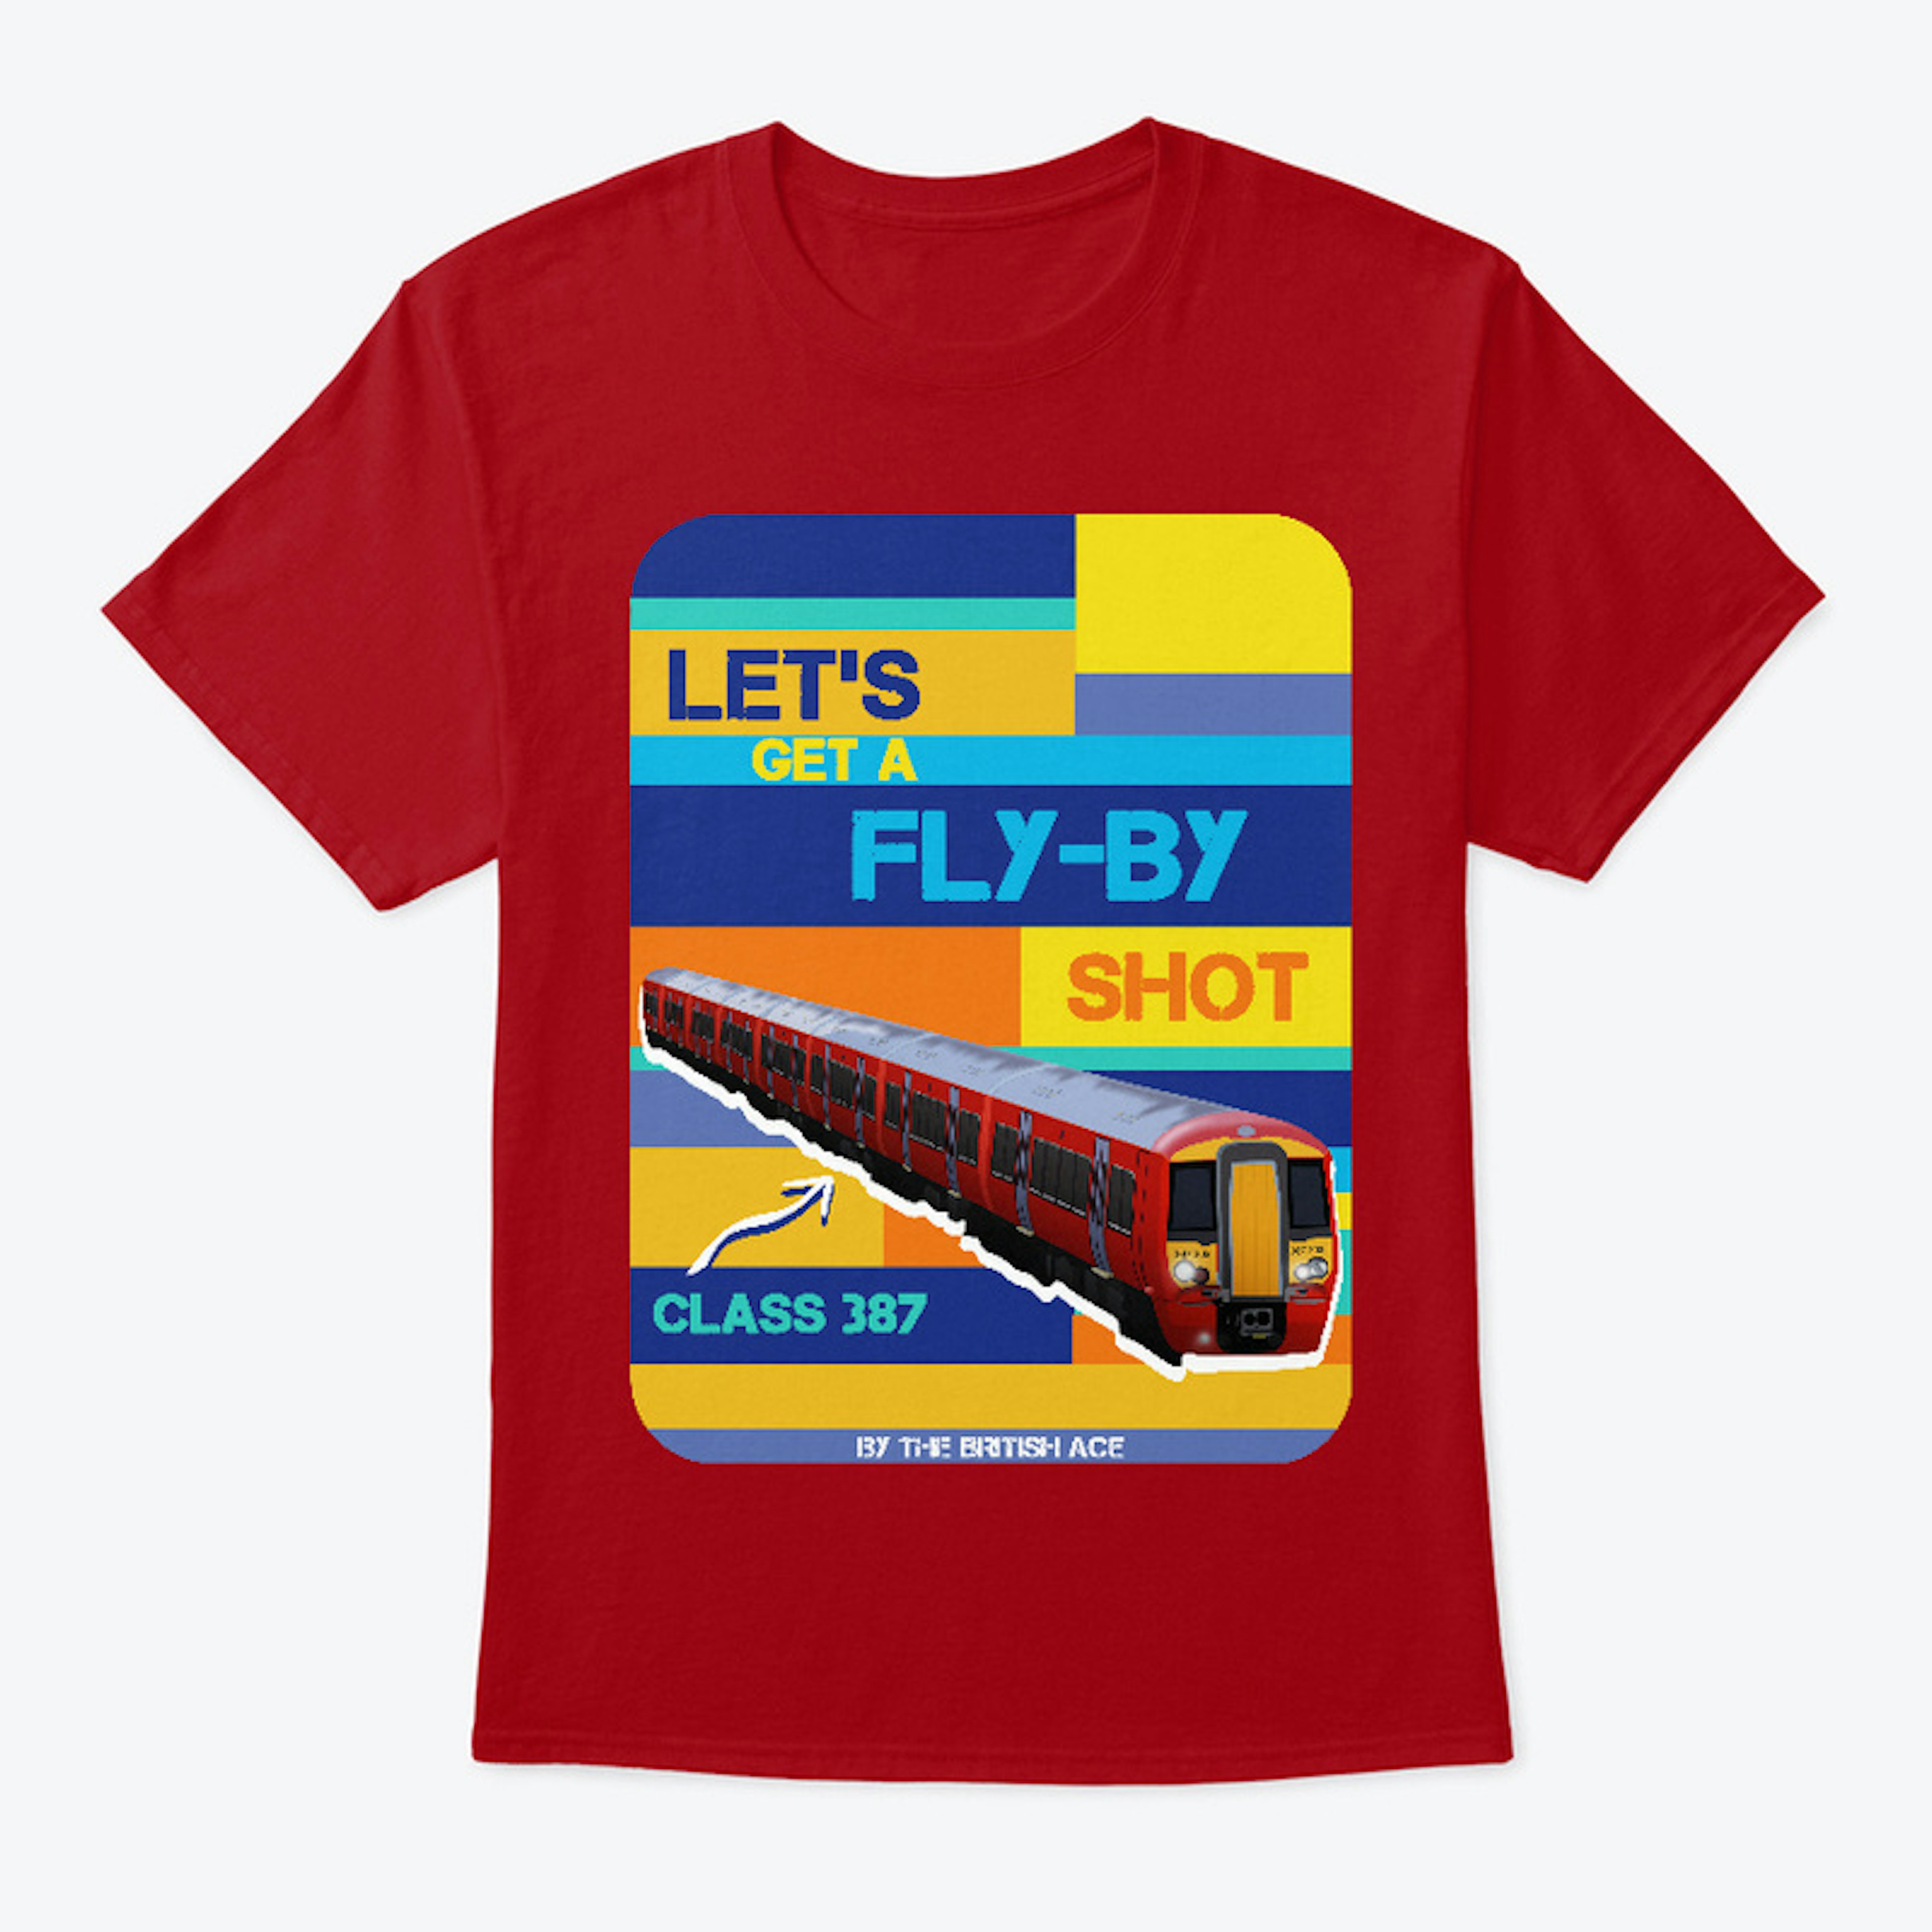 Class 387 Top (Let's get a FBS Edition)